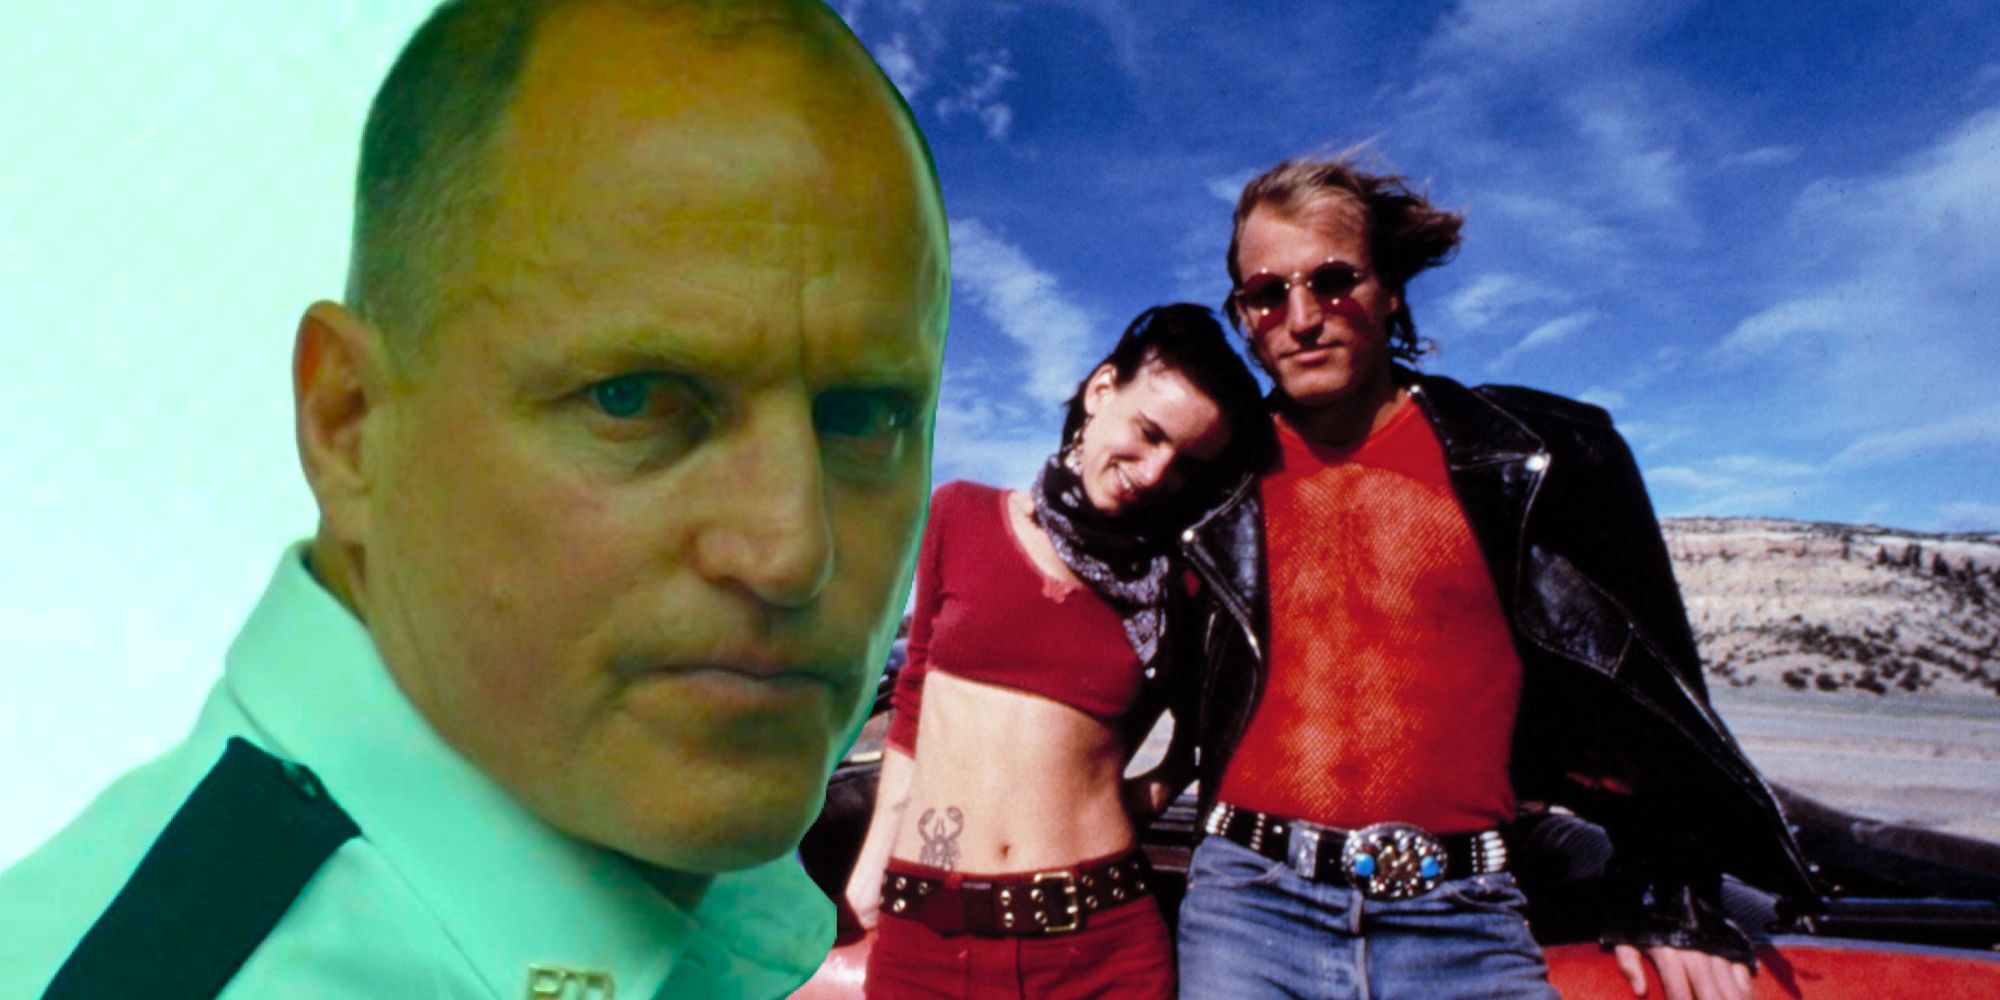 Woody Harrelson Best Movies - Three Billboards and Natural Born Killers Represented